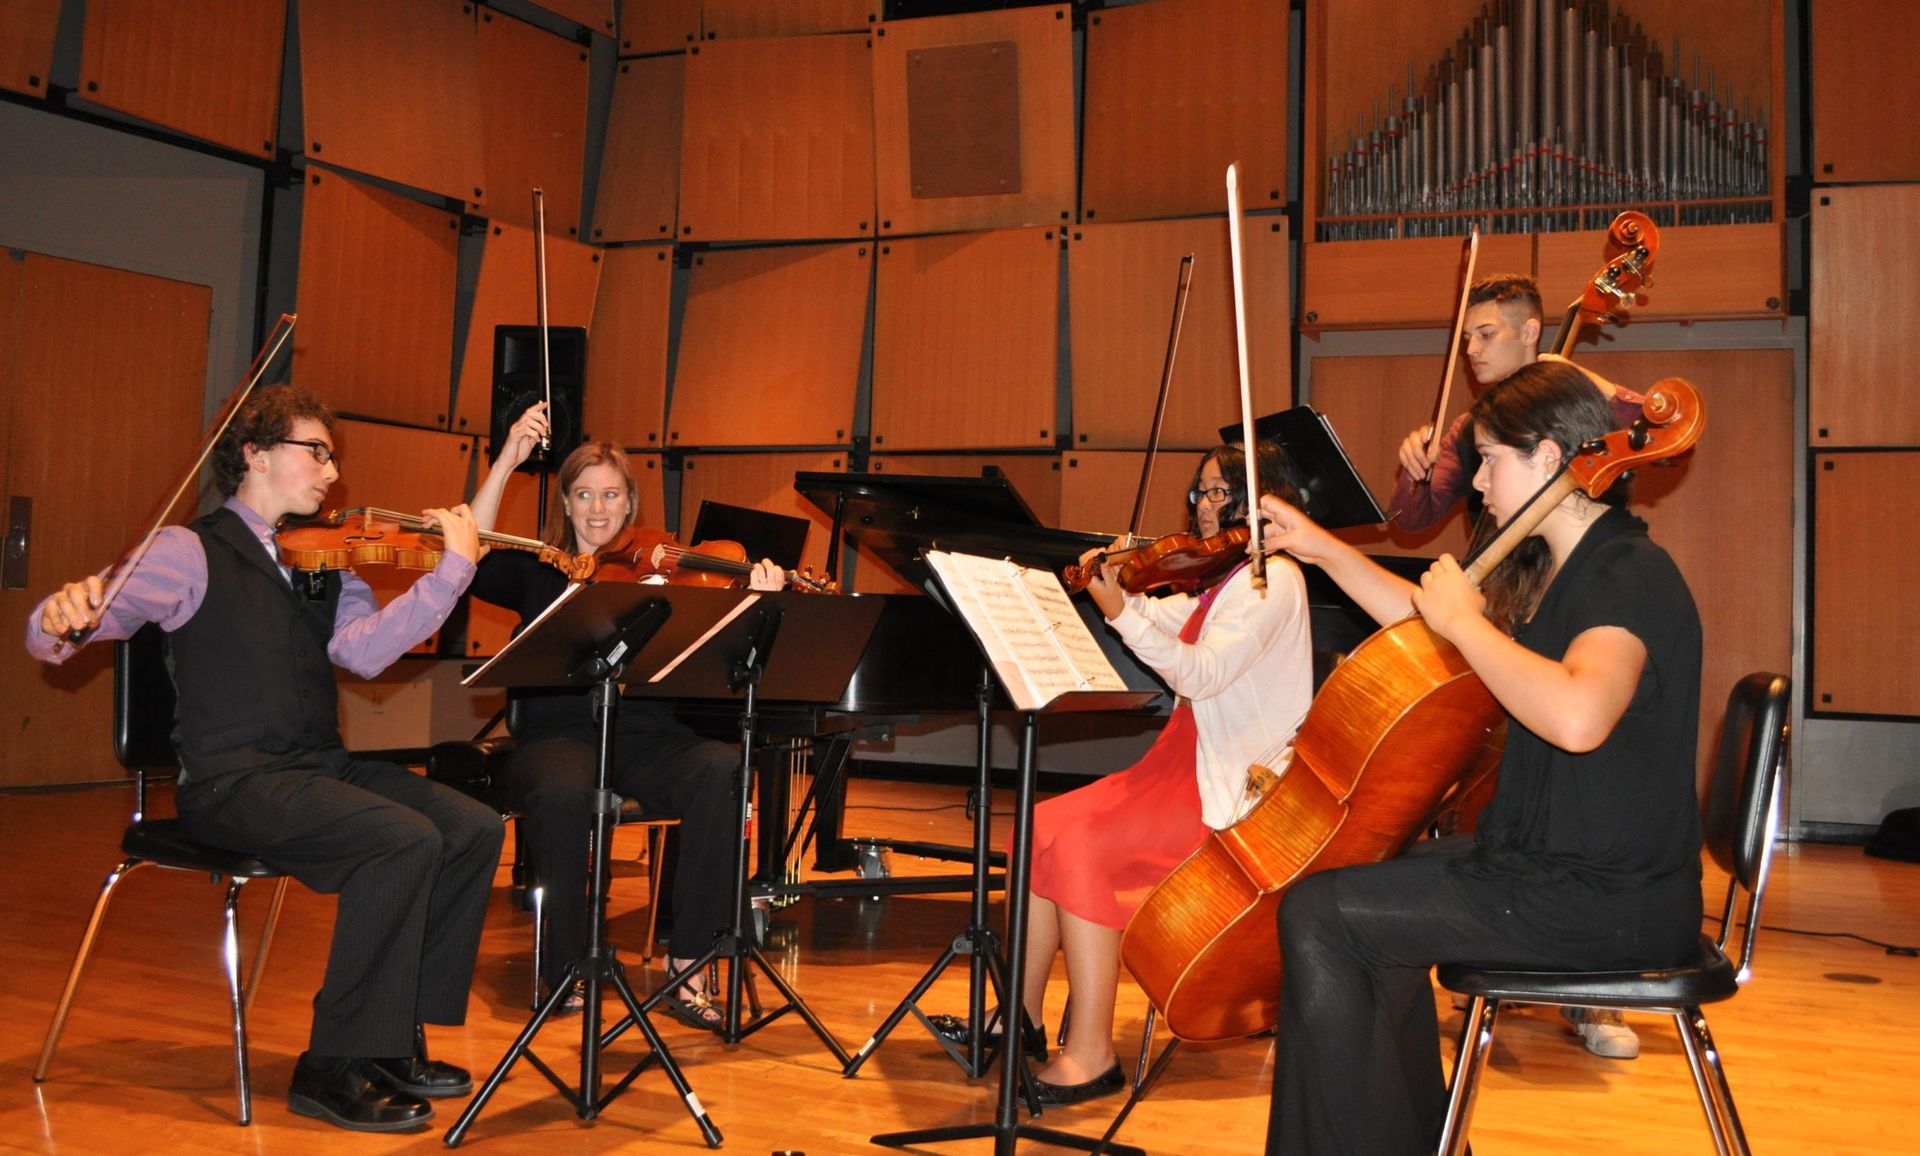 What Is Chamber Music?